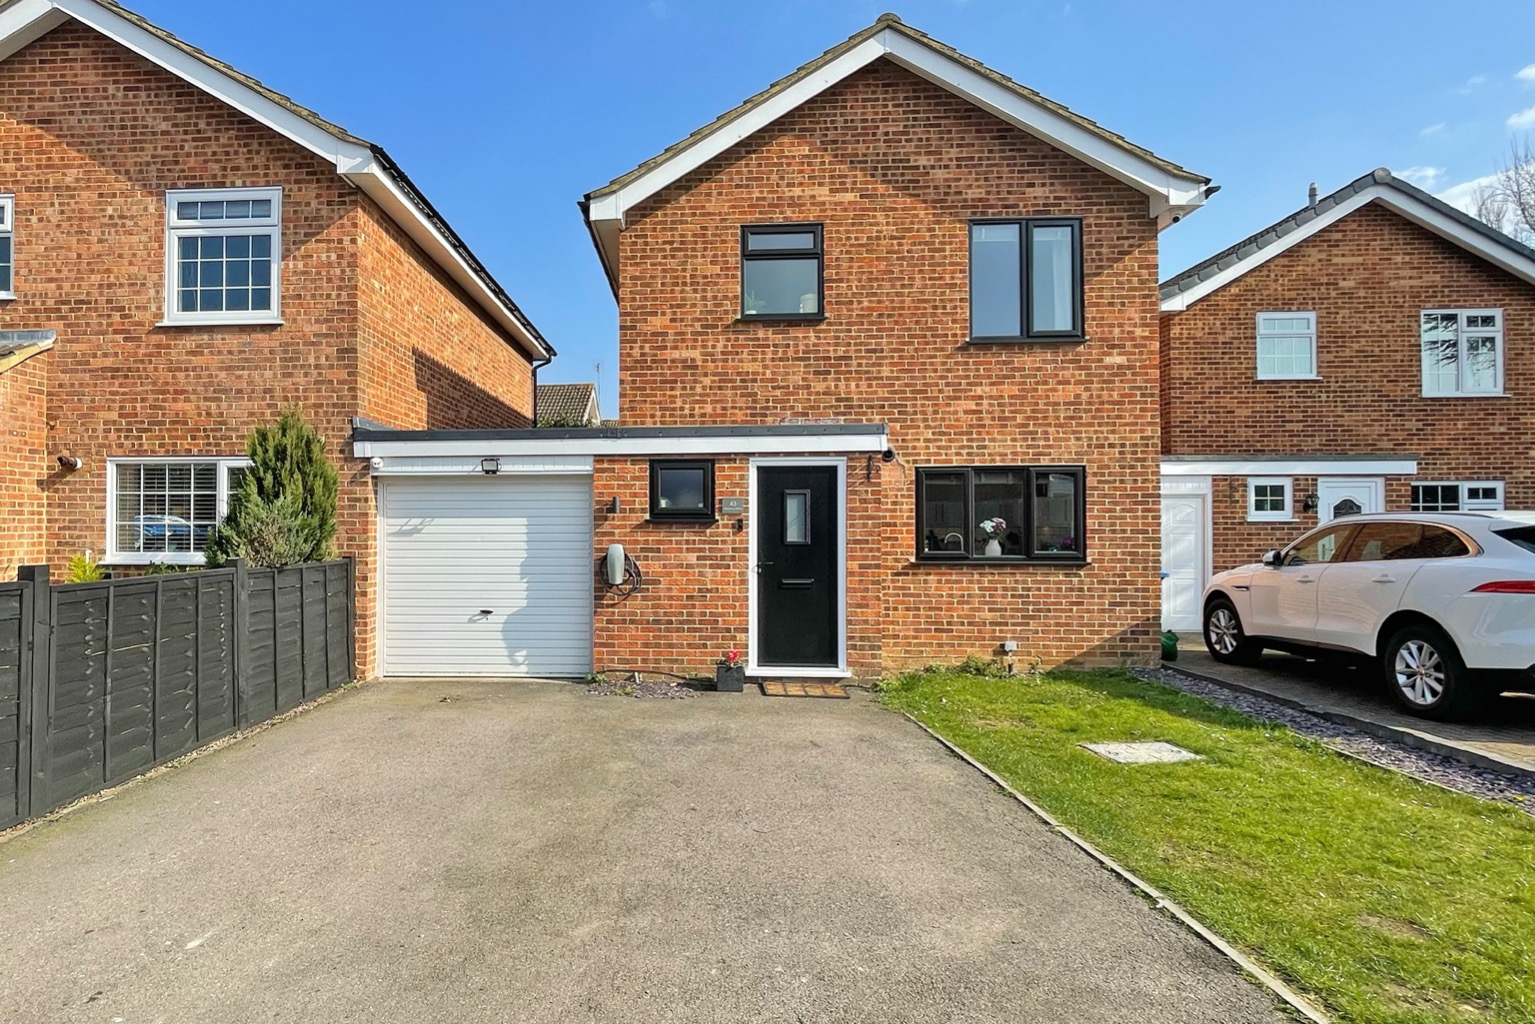 Be quick as this one will be very popular! Lowbrook Academy catchment